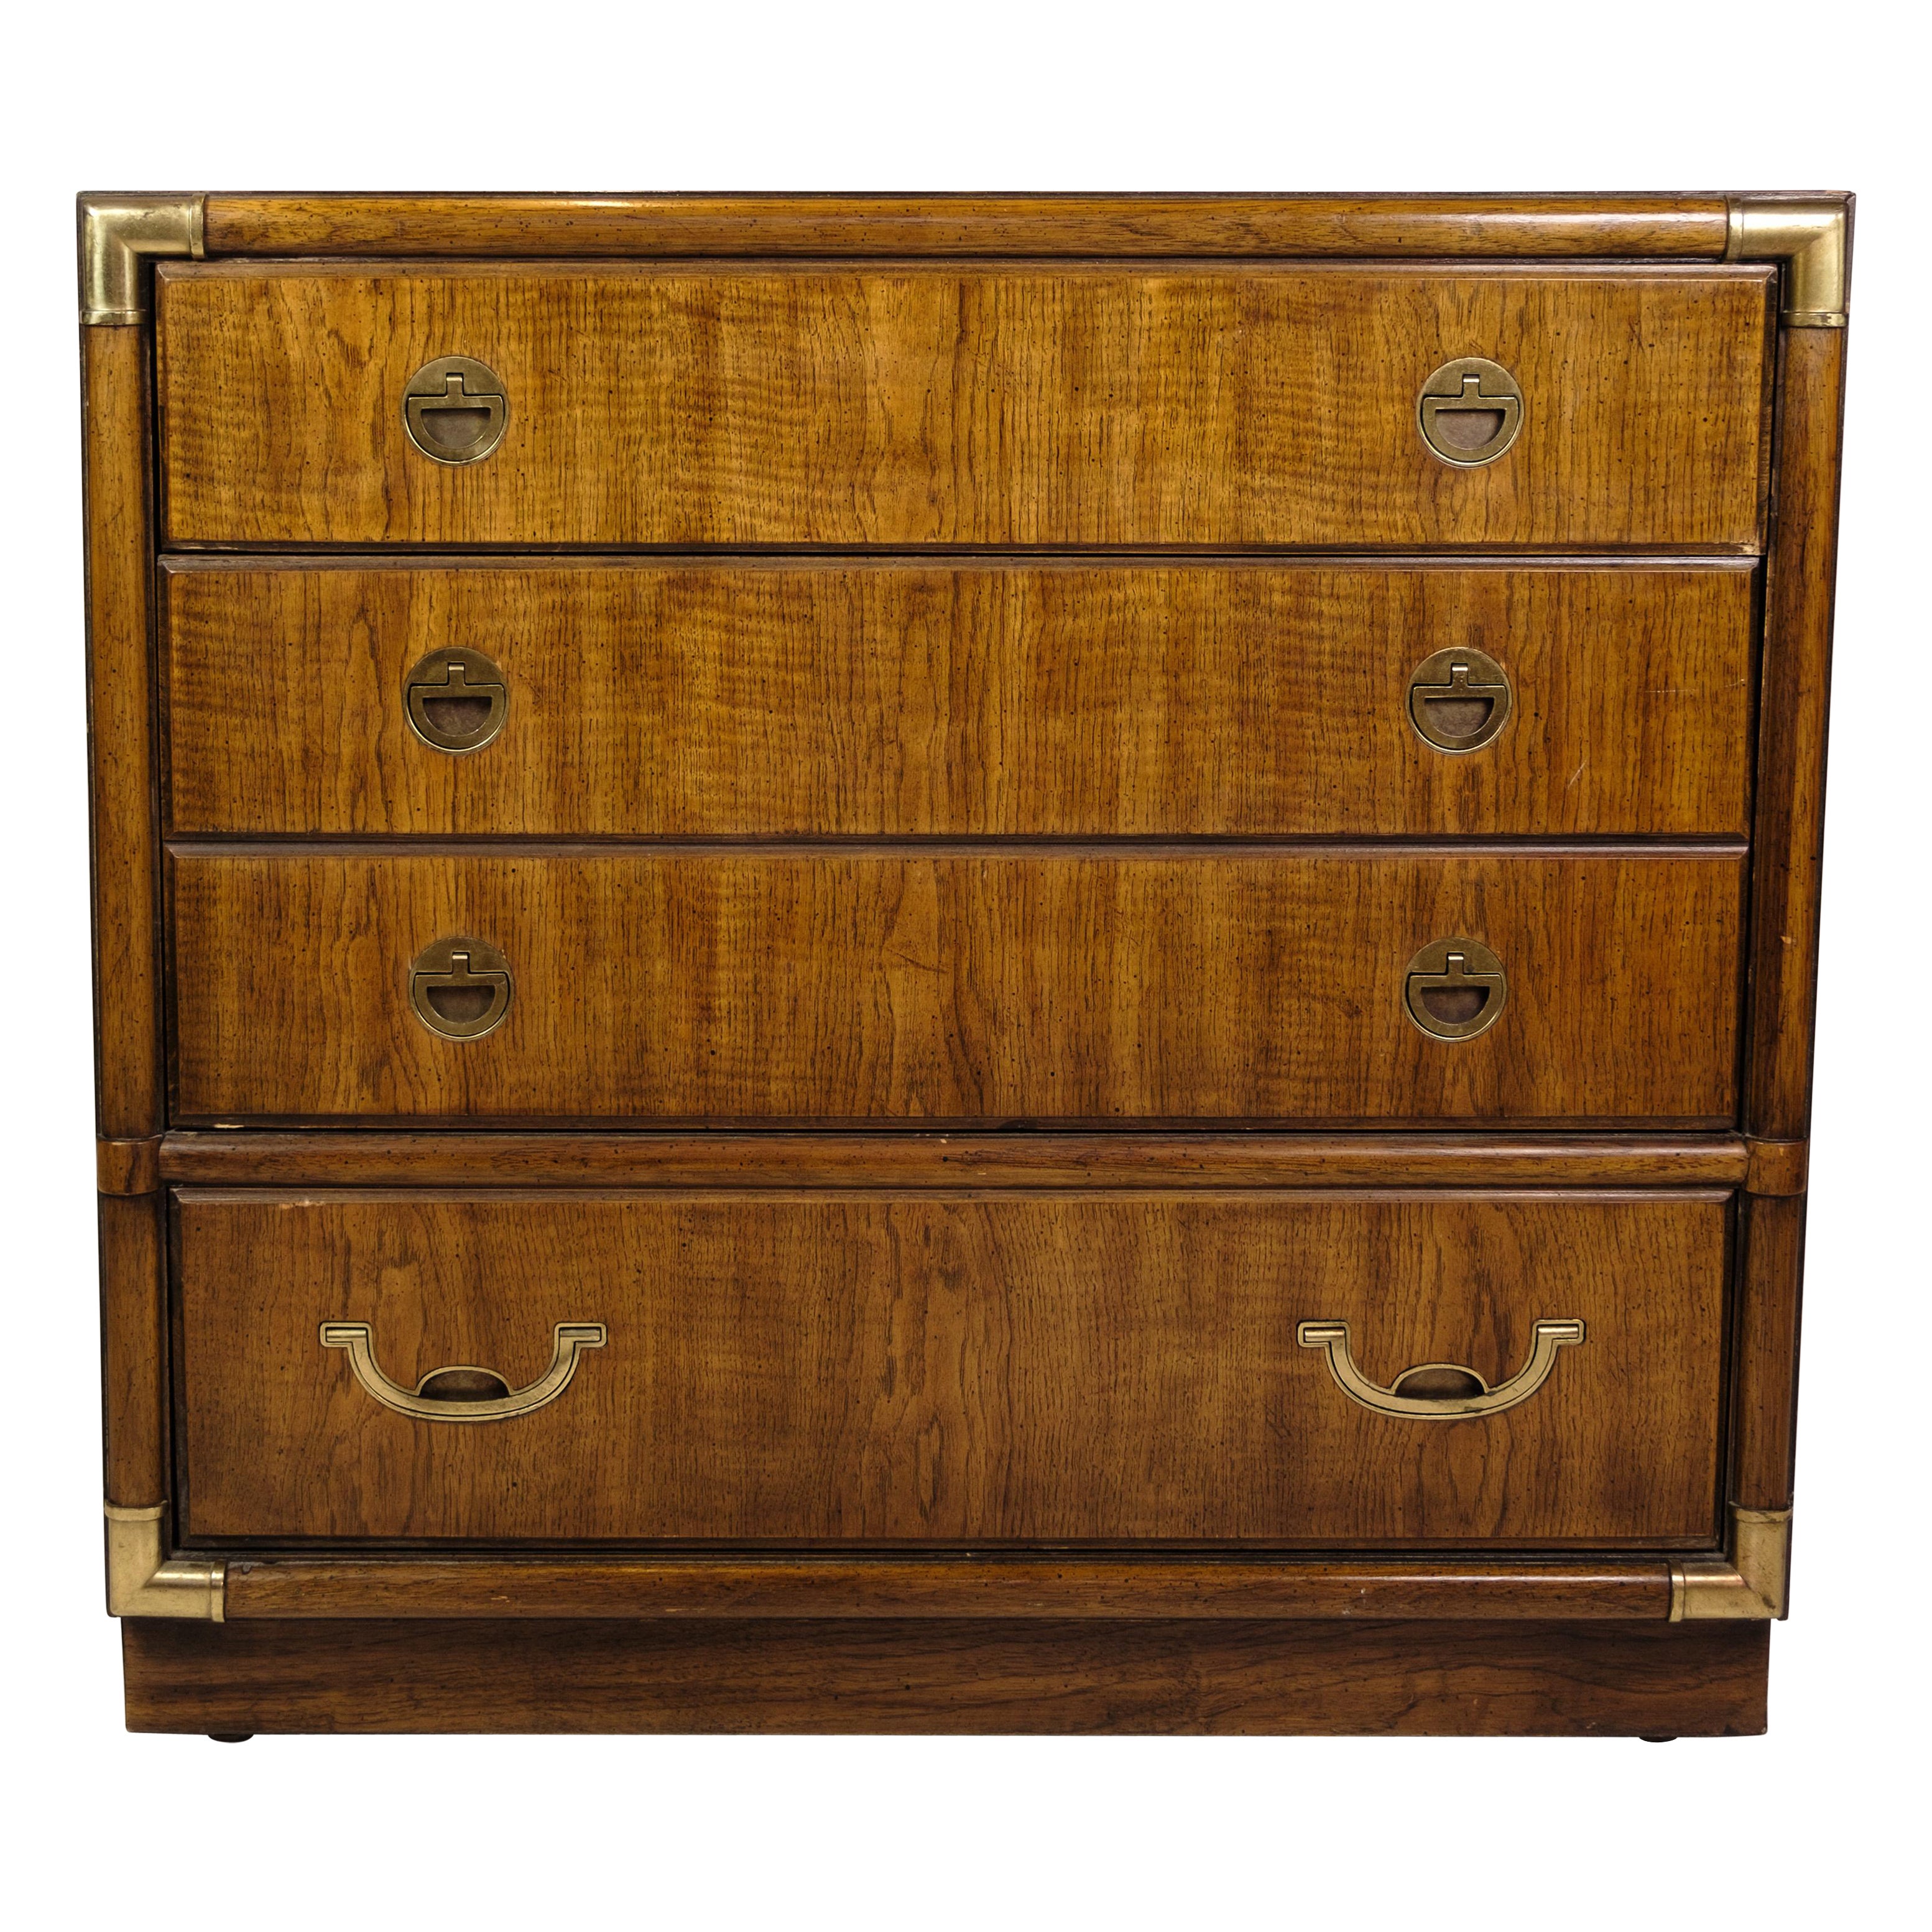 Chest of drawers with 4 drawers and brass fittings from the 1920s